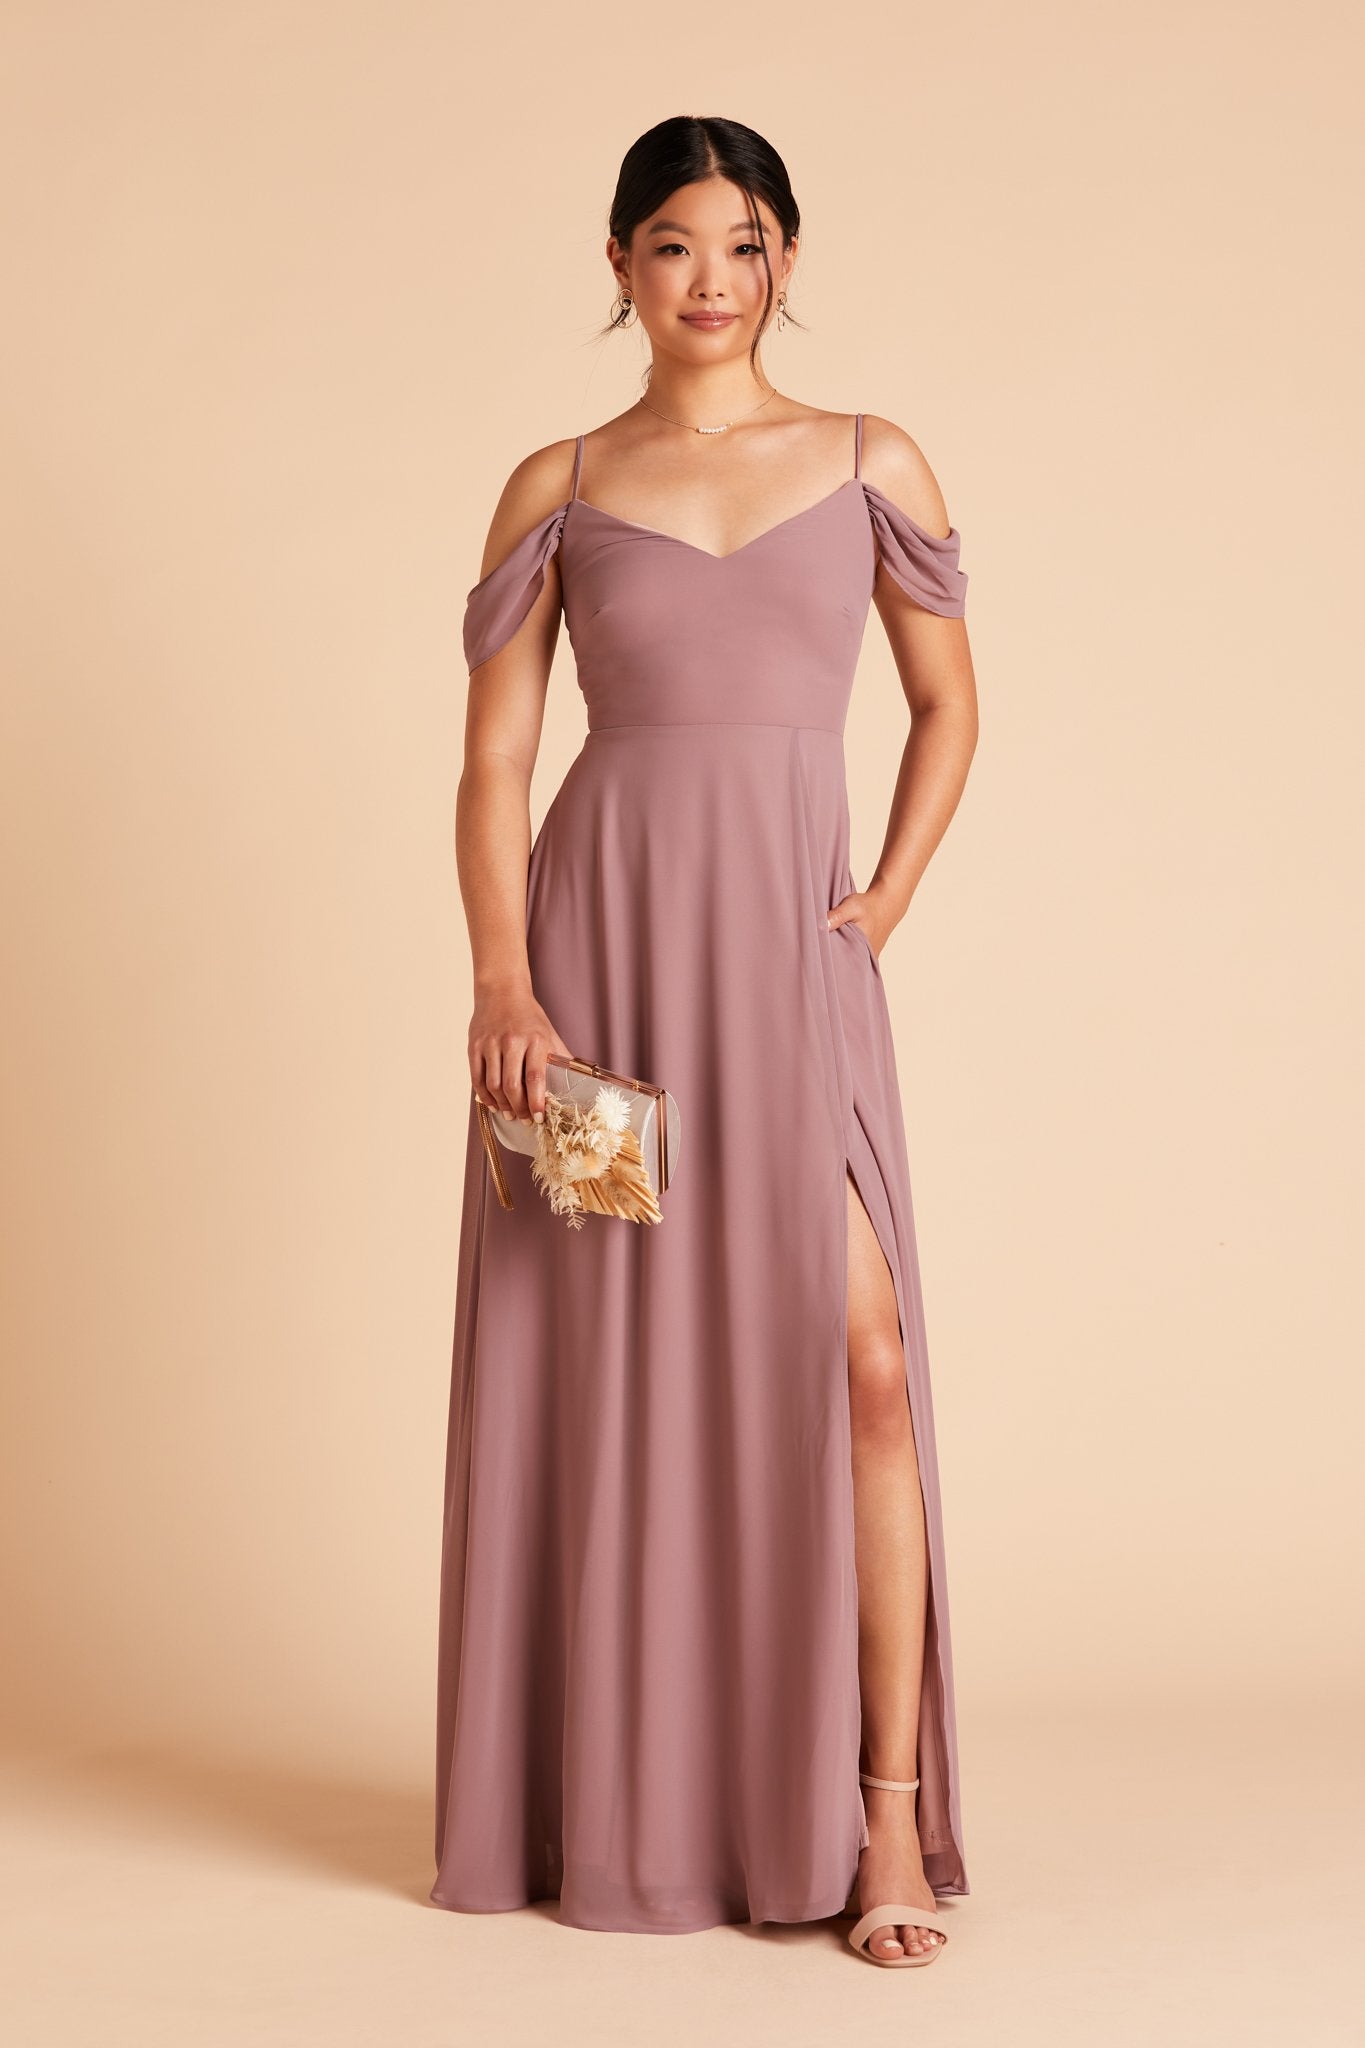 Devin convertible bridesmaid dress with slit in dark mauve chiffon by Birdy Grey, front view with hand in pocket